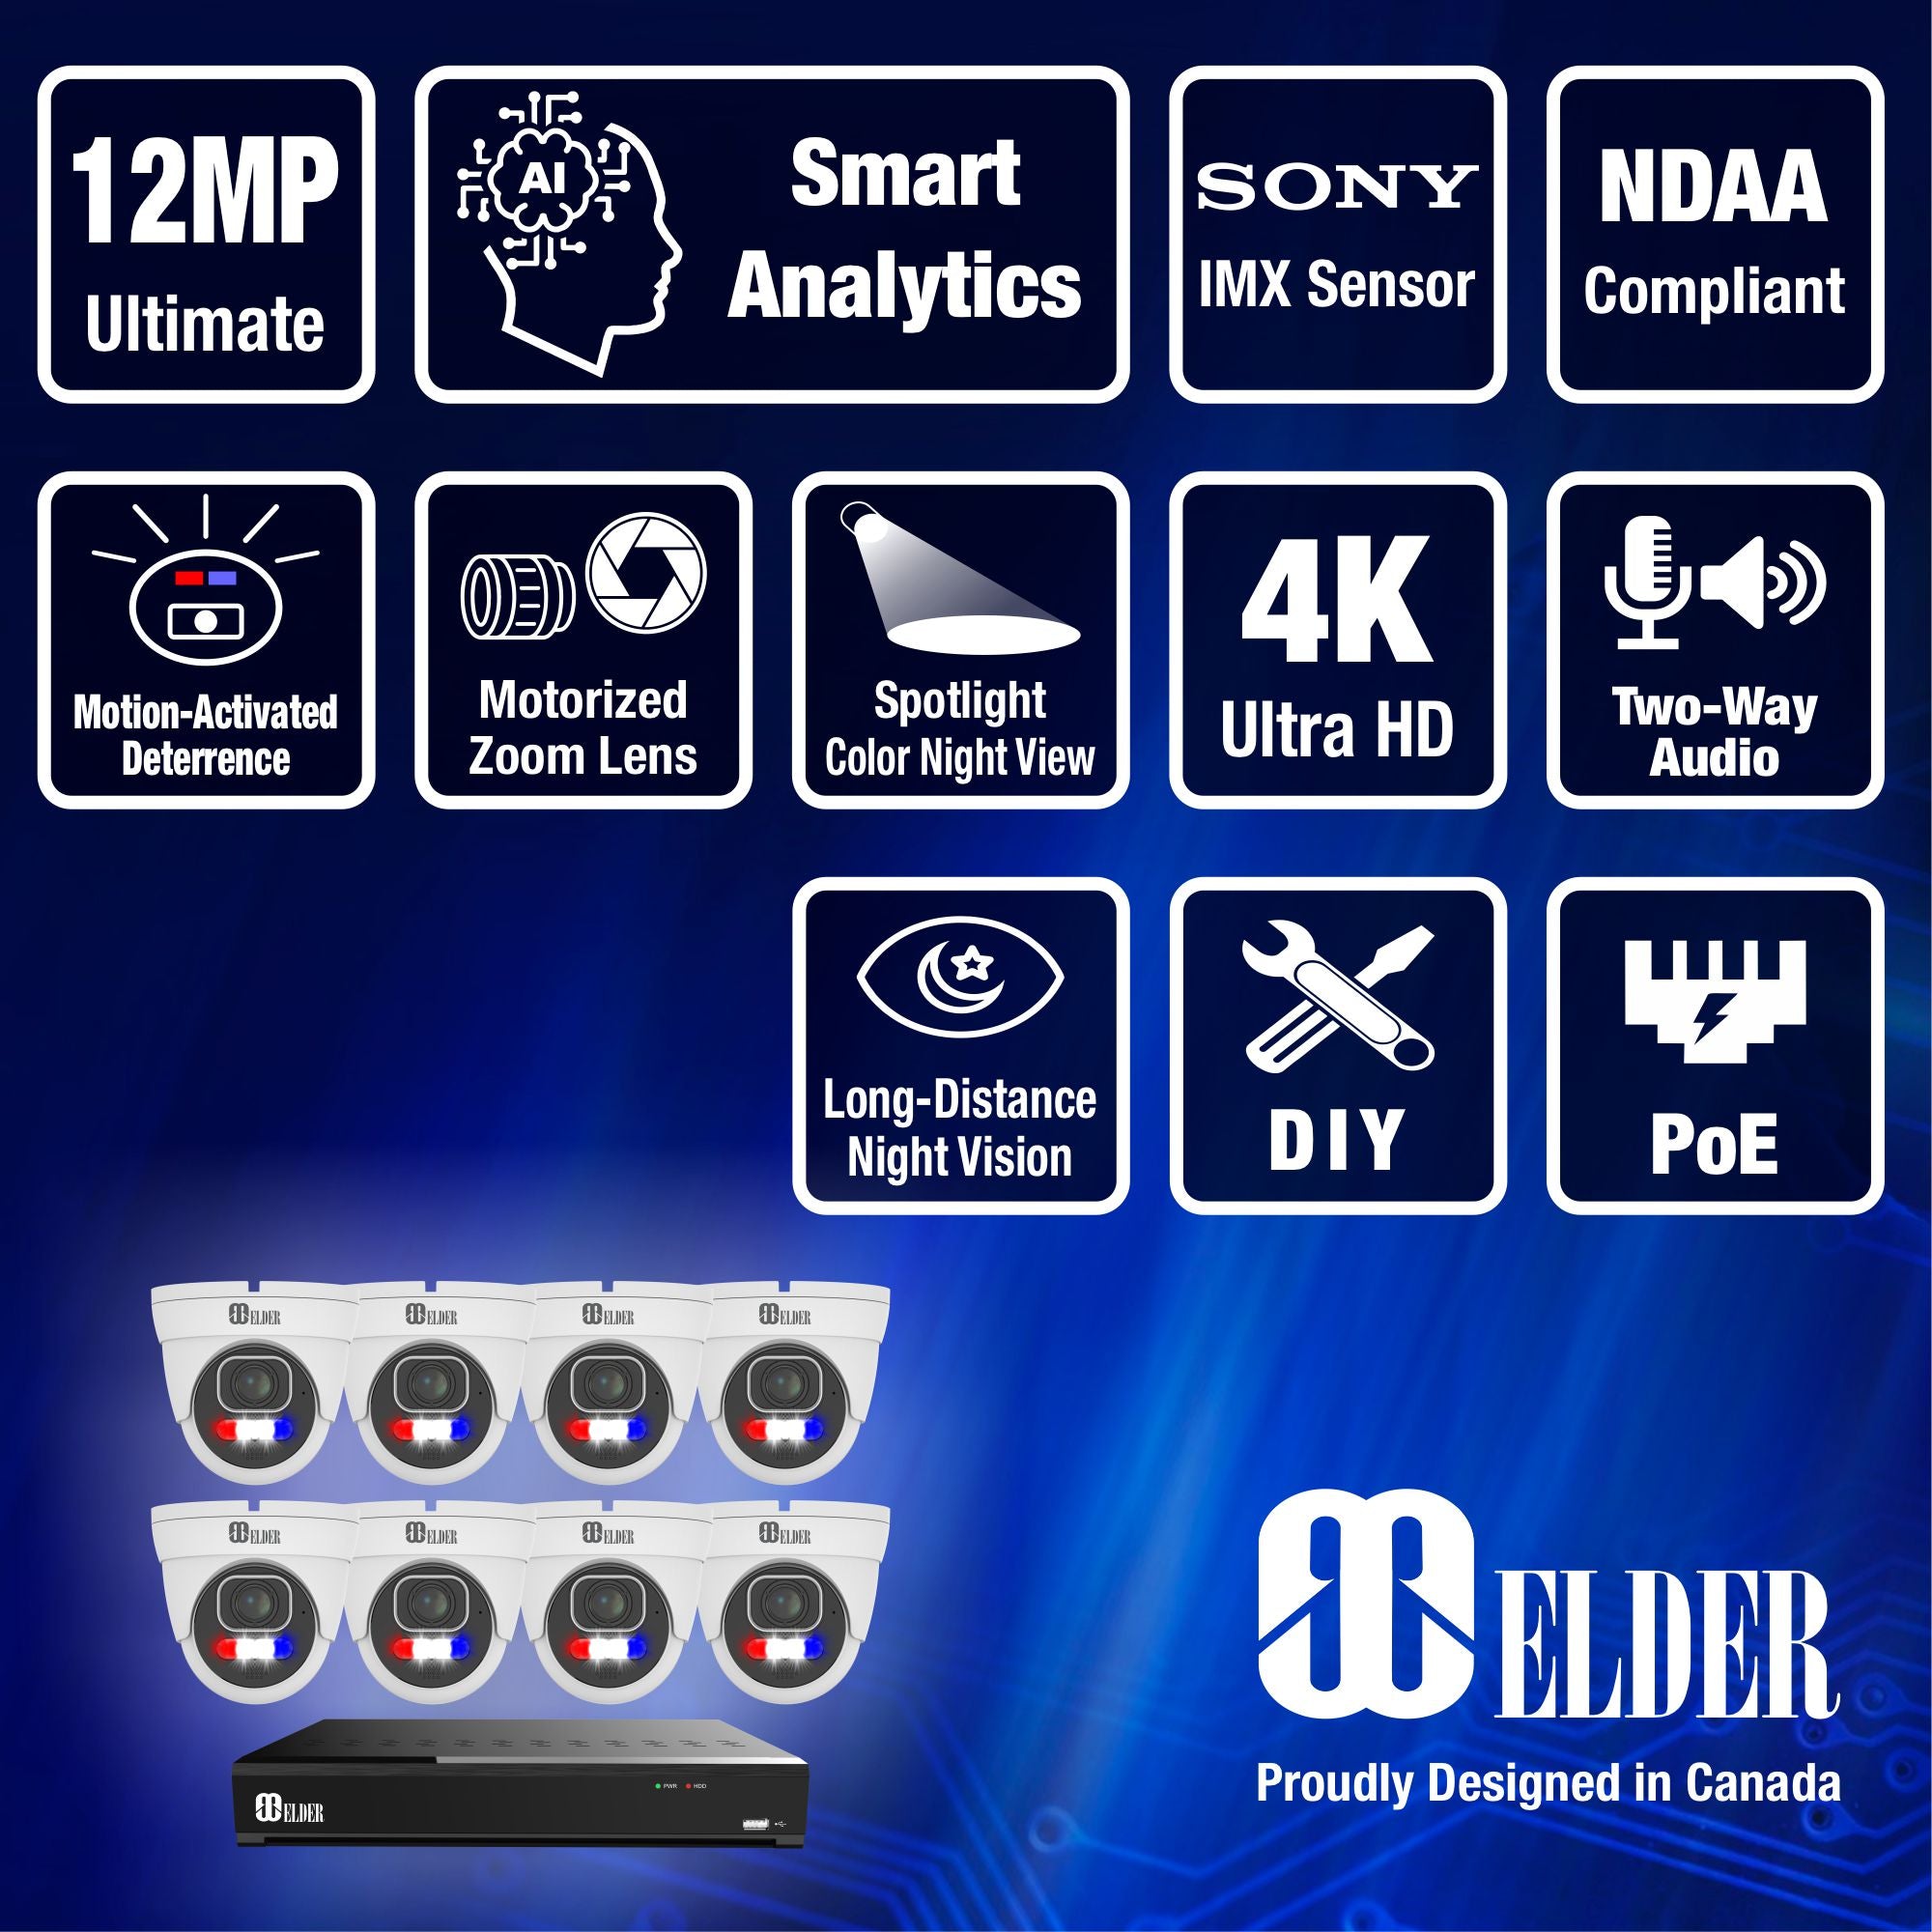 NVR Security Camera System Motorized Color Night Vision from Elder Nocturnal Surveillance Camera System Series